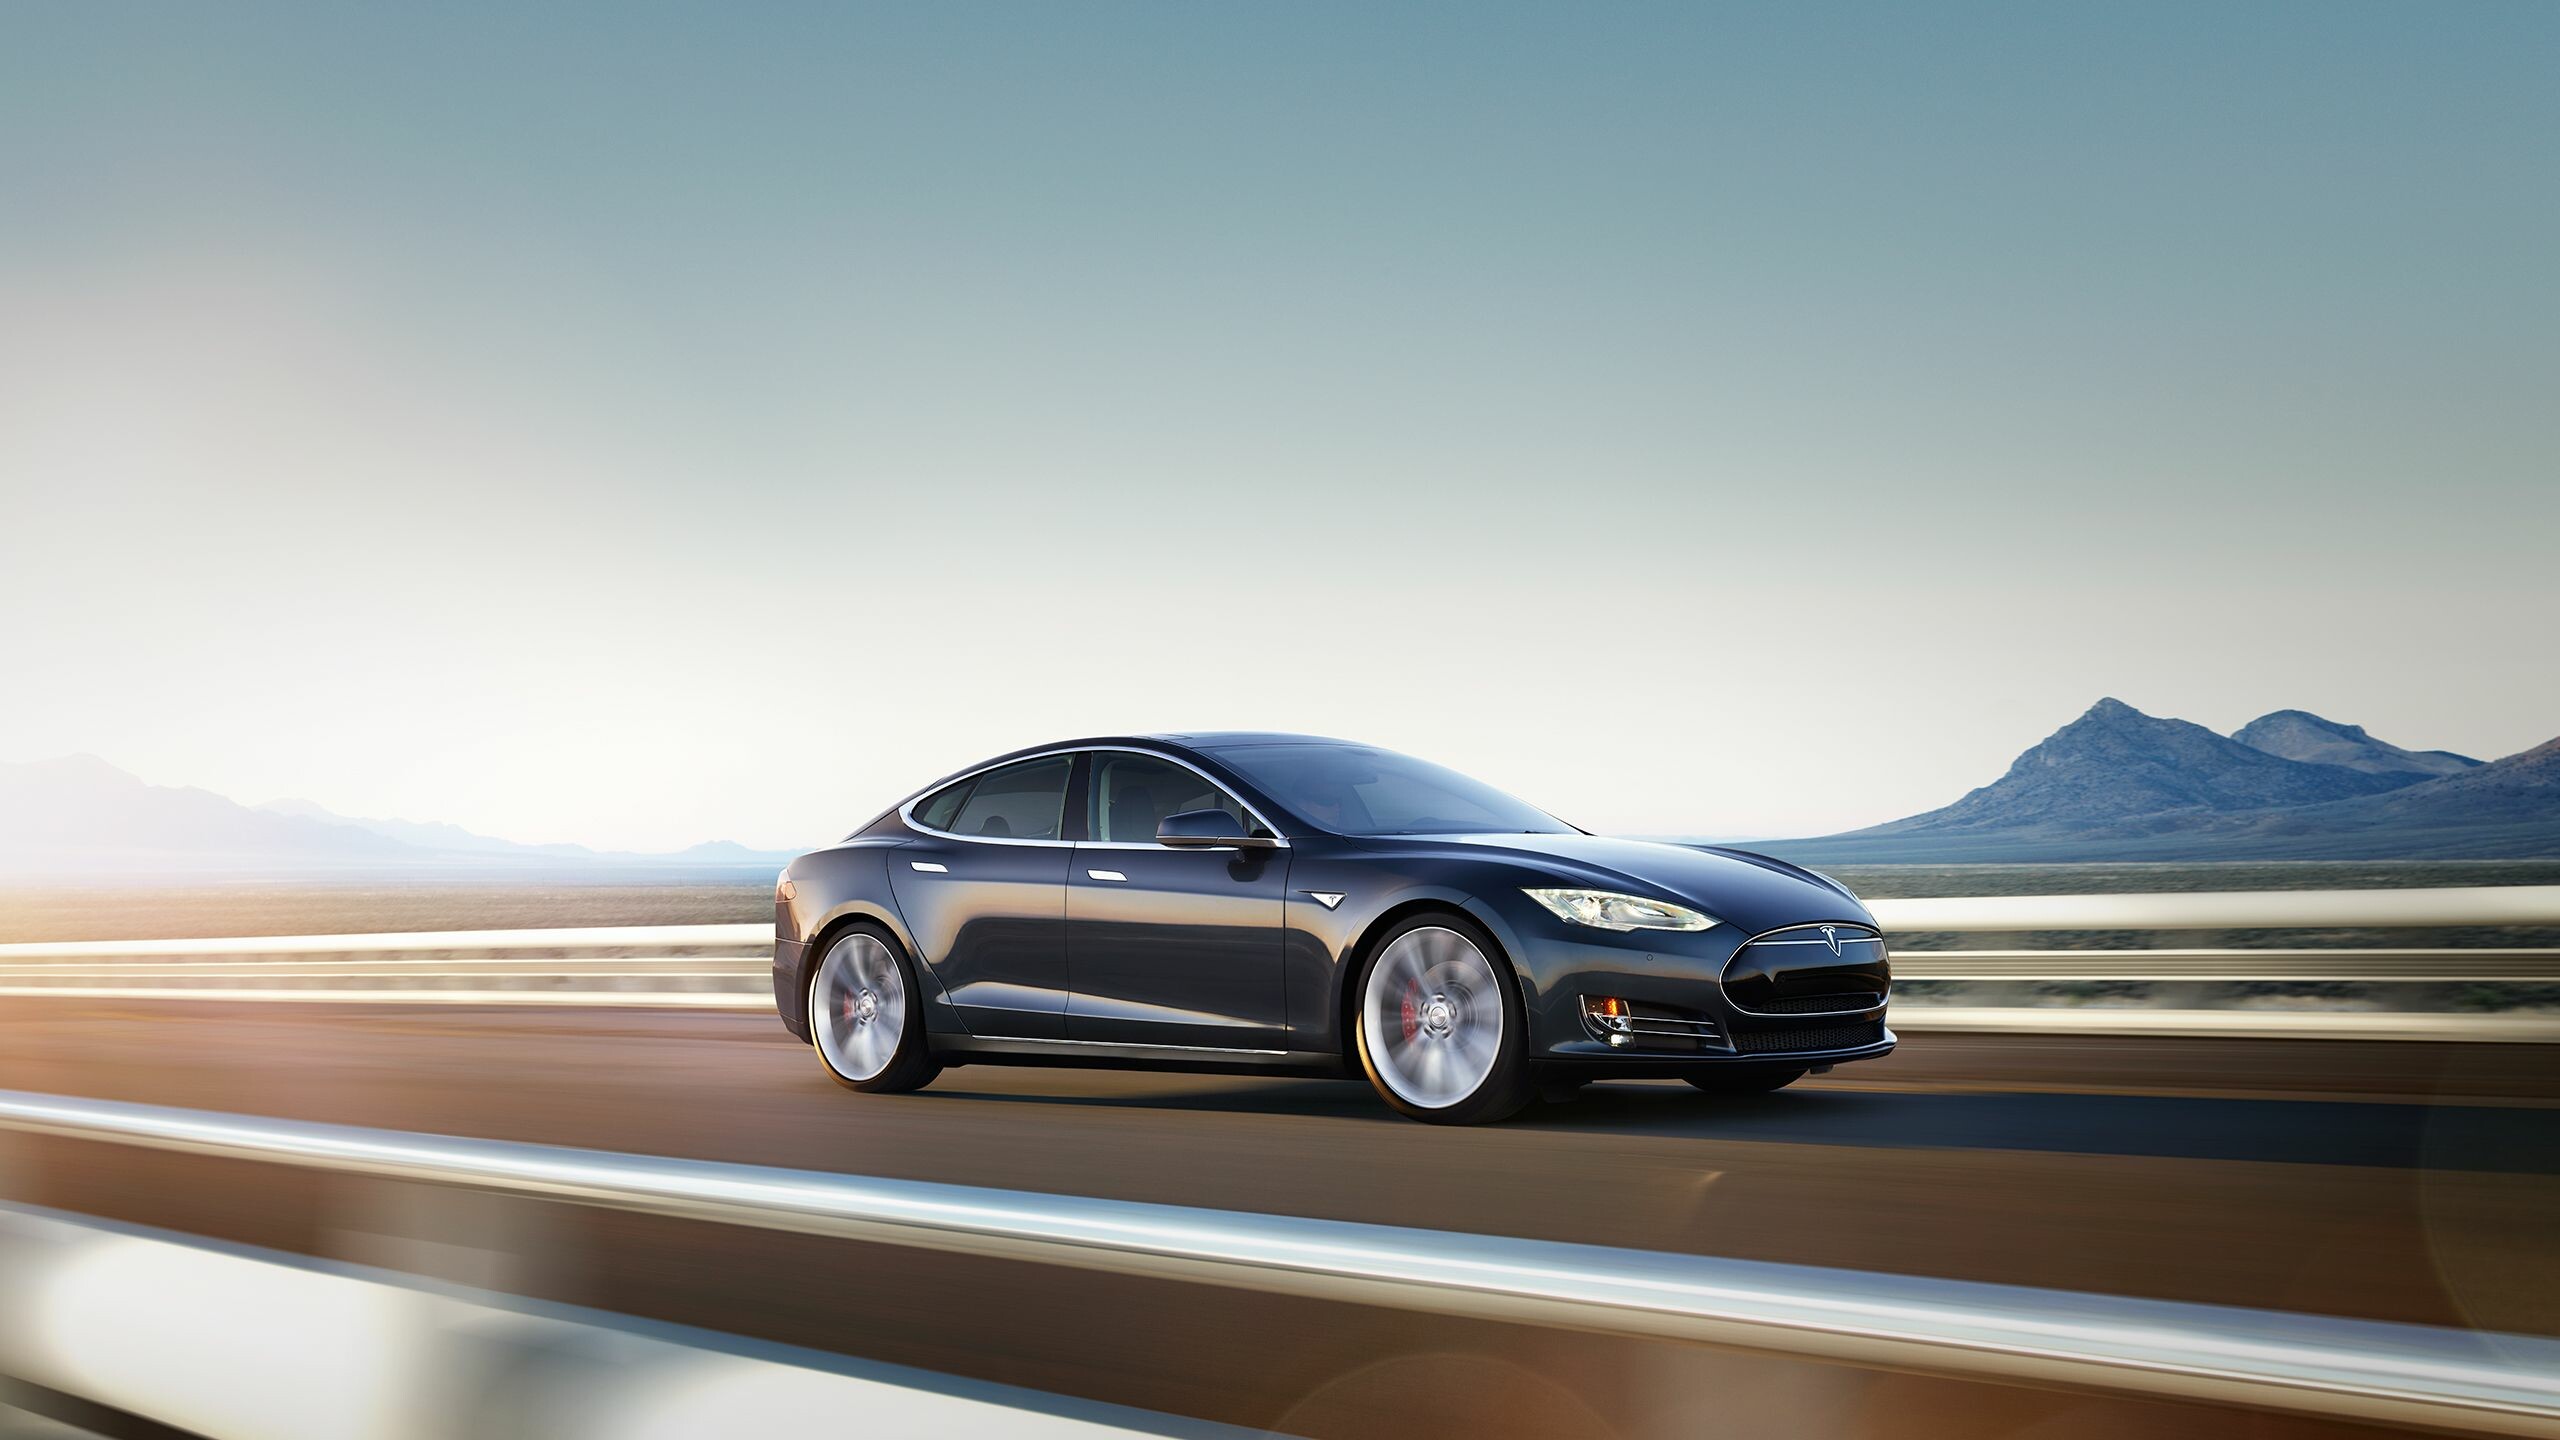 Tesla Model S: Electric 4-door hatchback, A vehicle with no gasoline or diesel engine to help power the car. 2560x1440 HD Background.